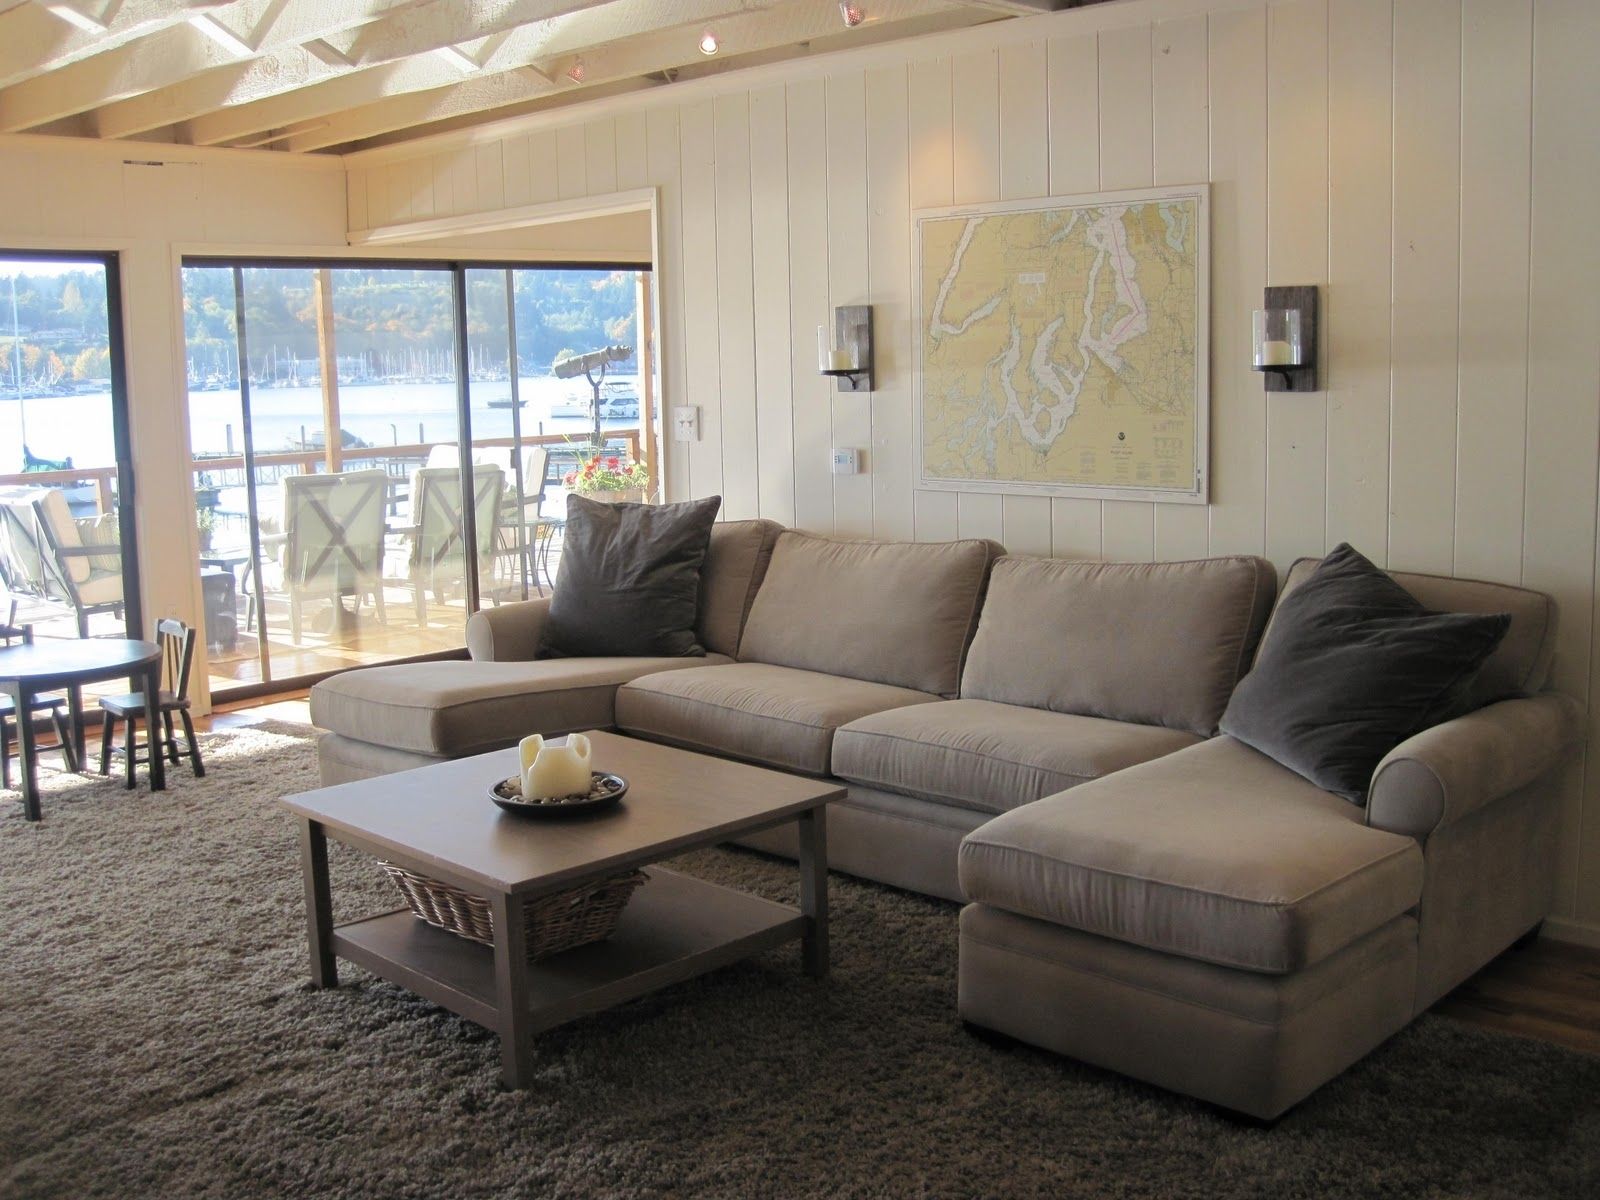 U Shaped Sectional With Chaise Design | Homesfeed In Big U Shaped Sectionals (View 9 of 15)